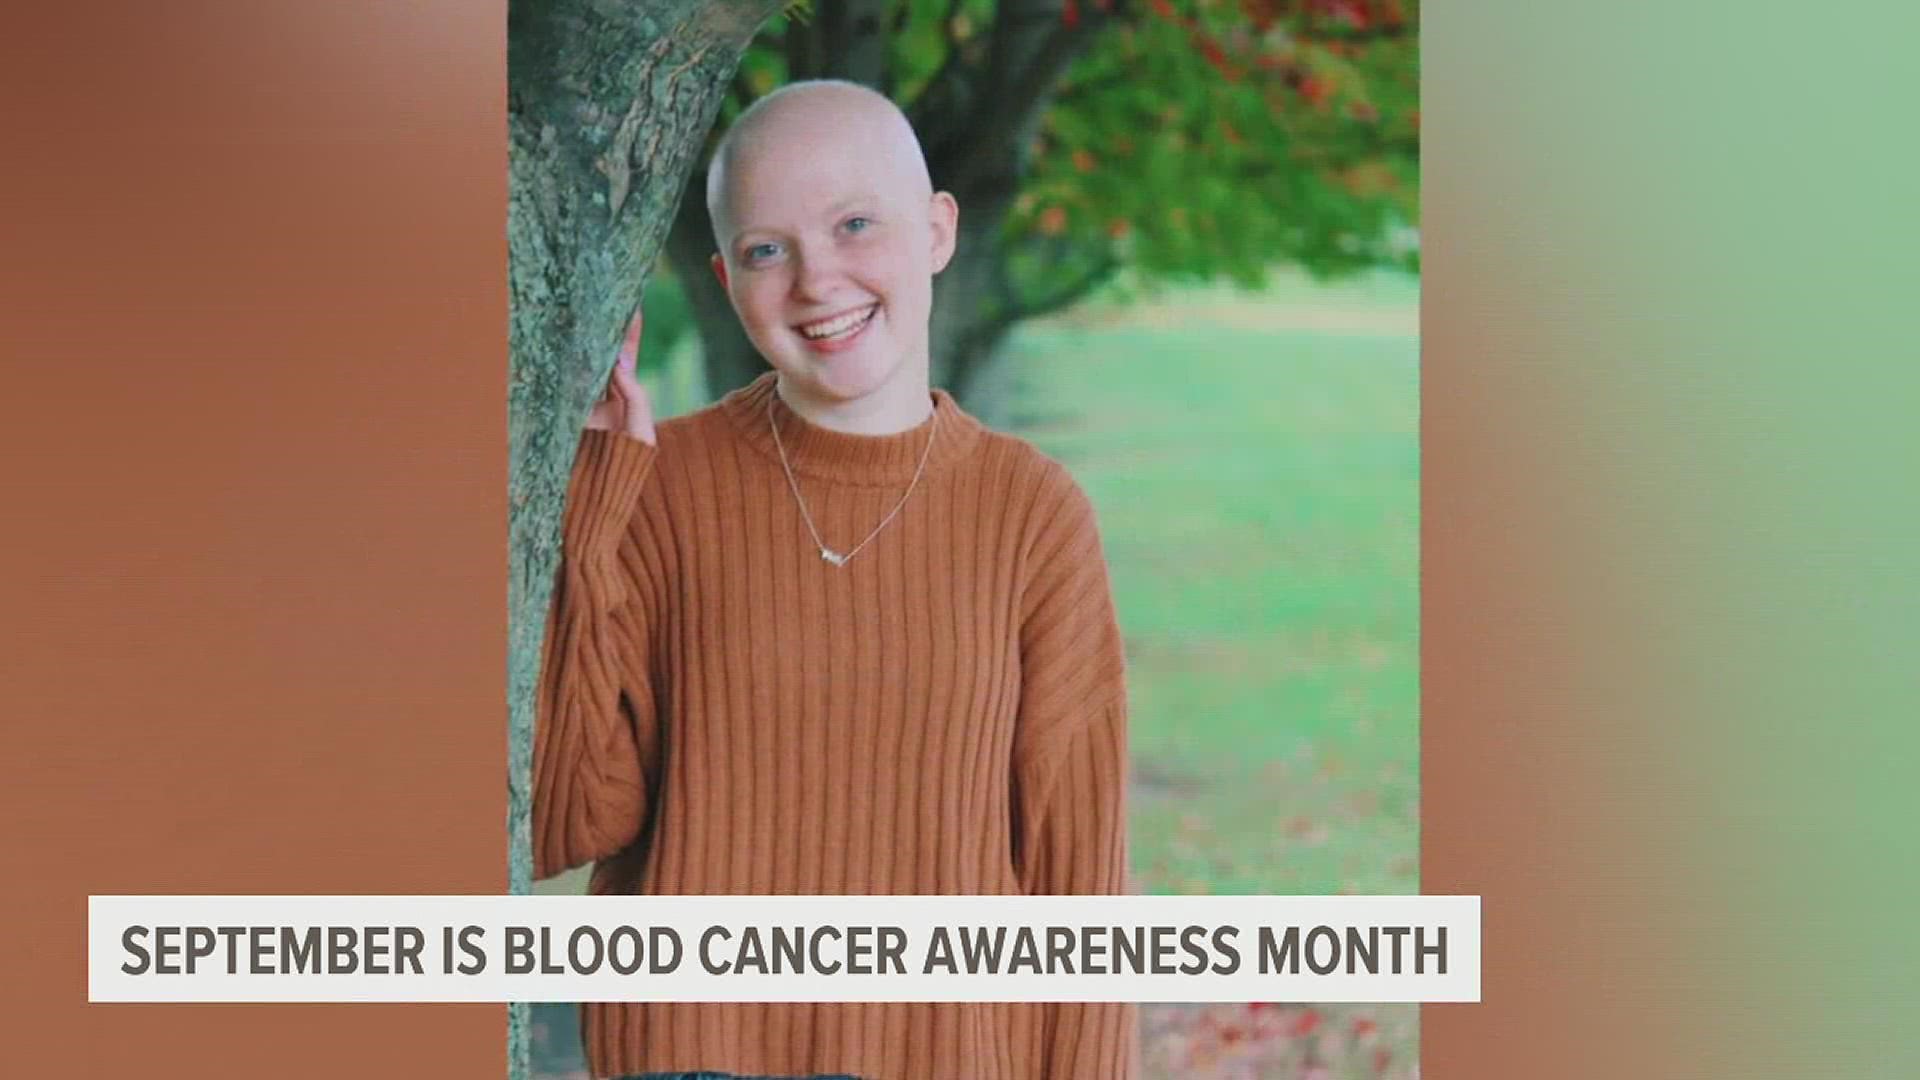 With September being Blood Cancer Awareness Month, FOX43 is chronicling how one family says the Leukemia and Lymphoma Society helped them.